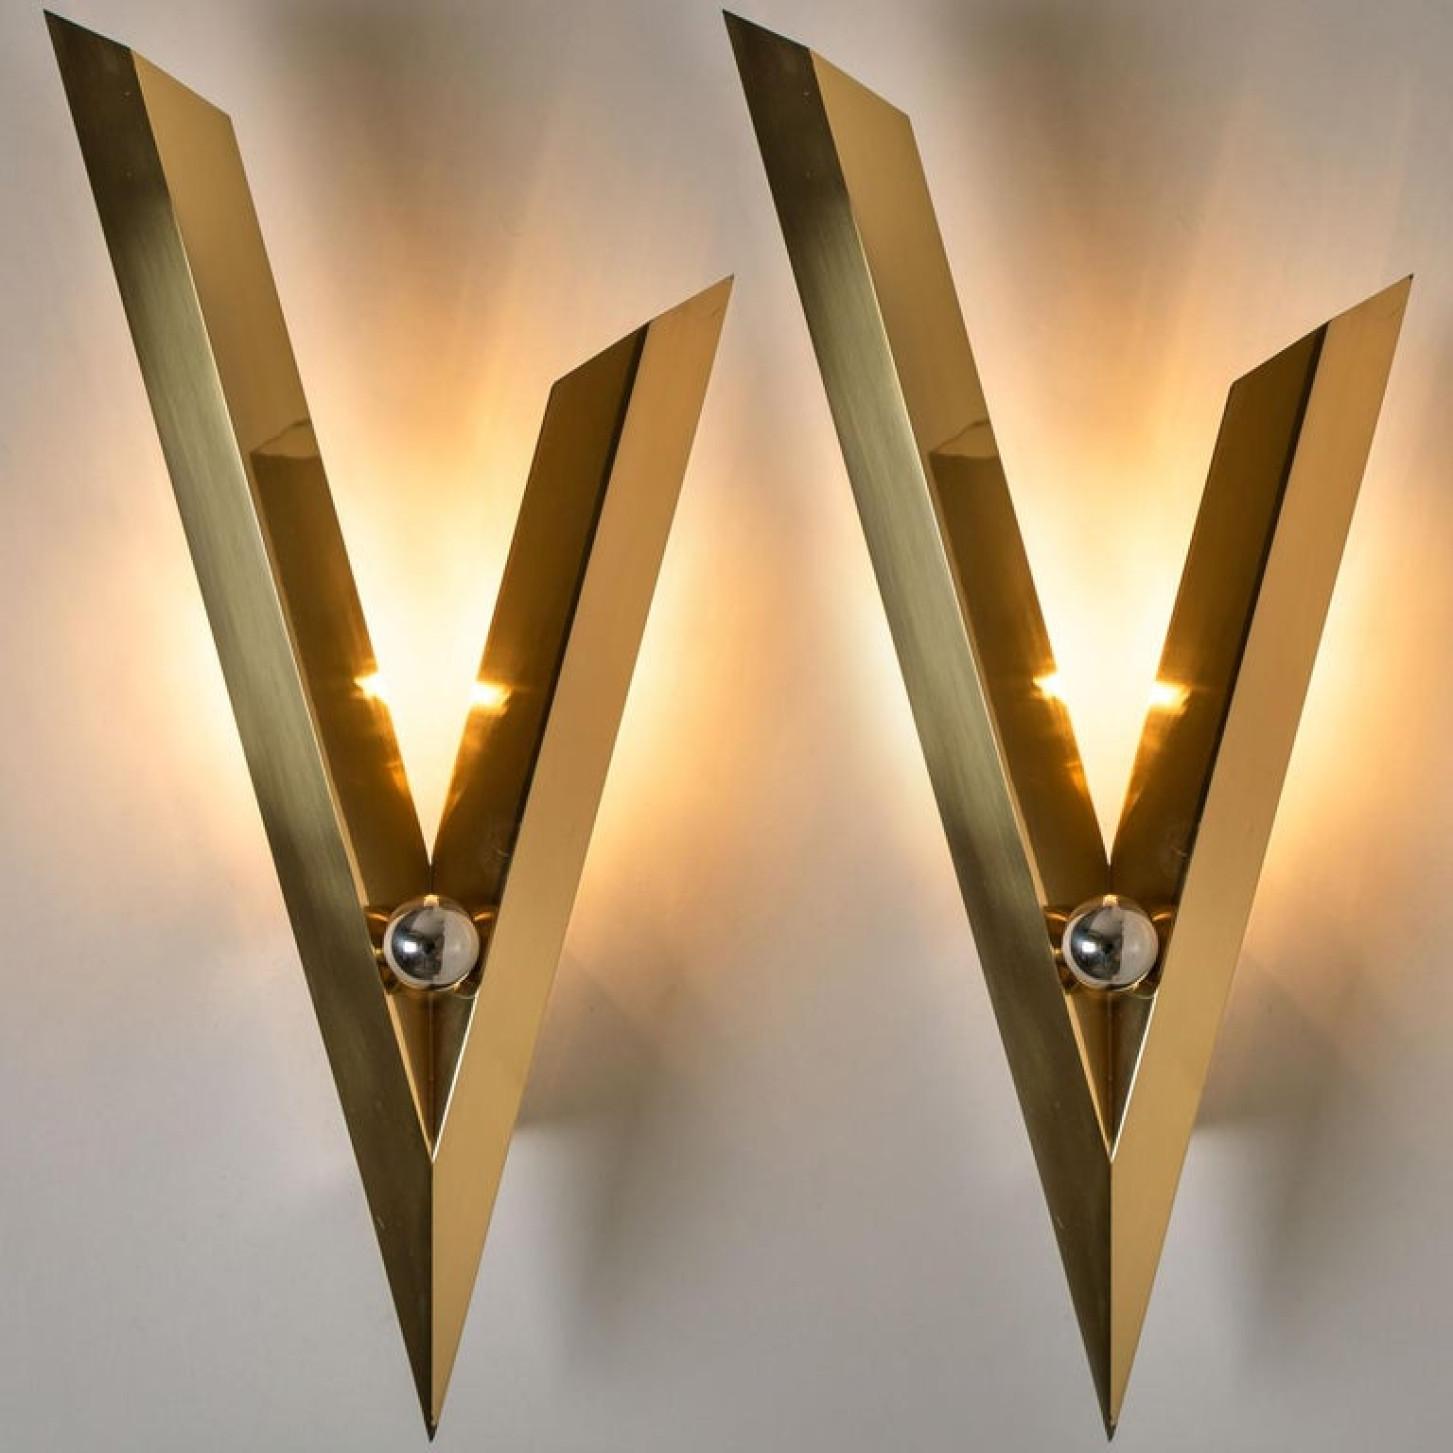 1 of the 5 Art Deco Style Solid Brass and Chrome Wall Sconces, 1980s In Good Condition For Sale In Rijssen, NL